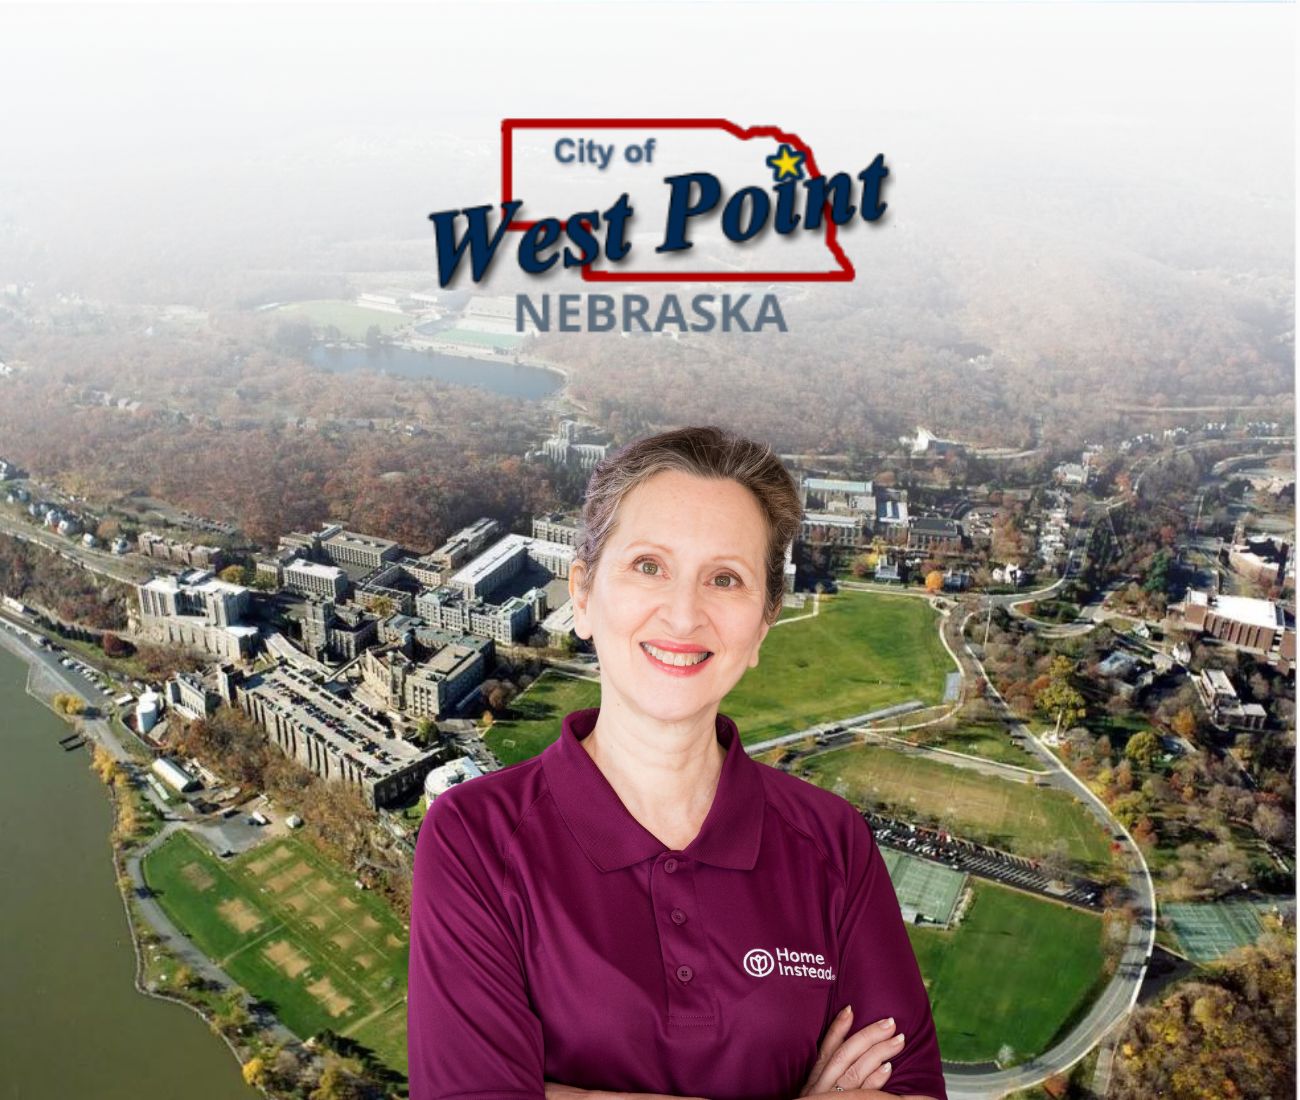 Home Instead caregiver standing in front of West Point, NE